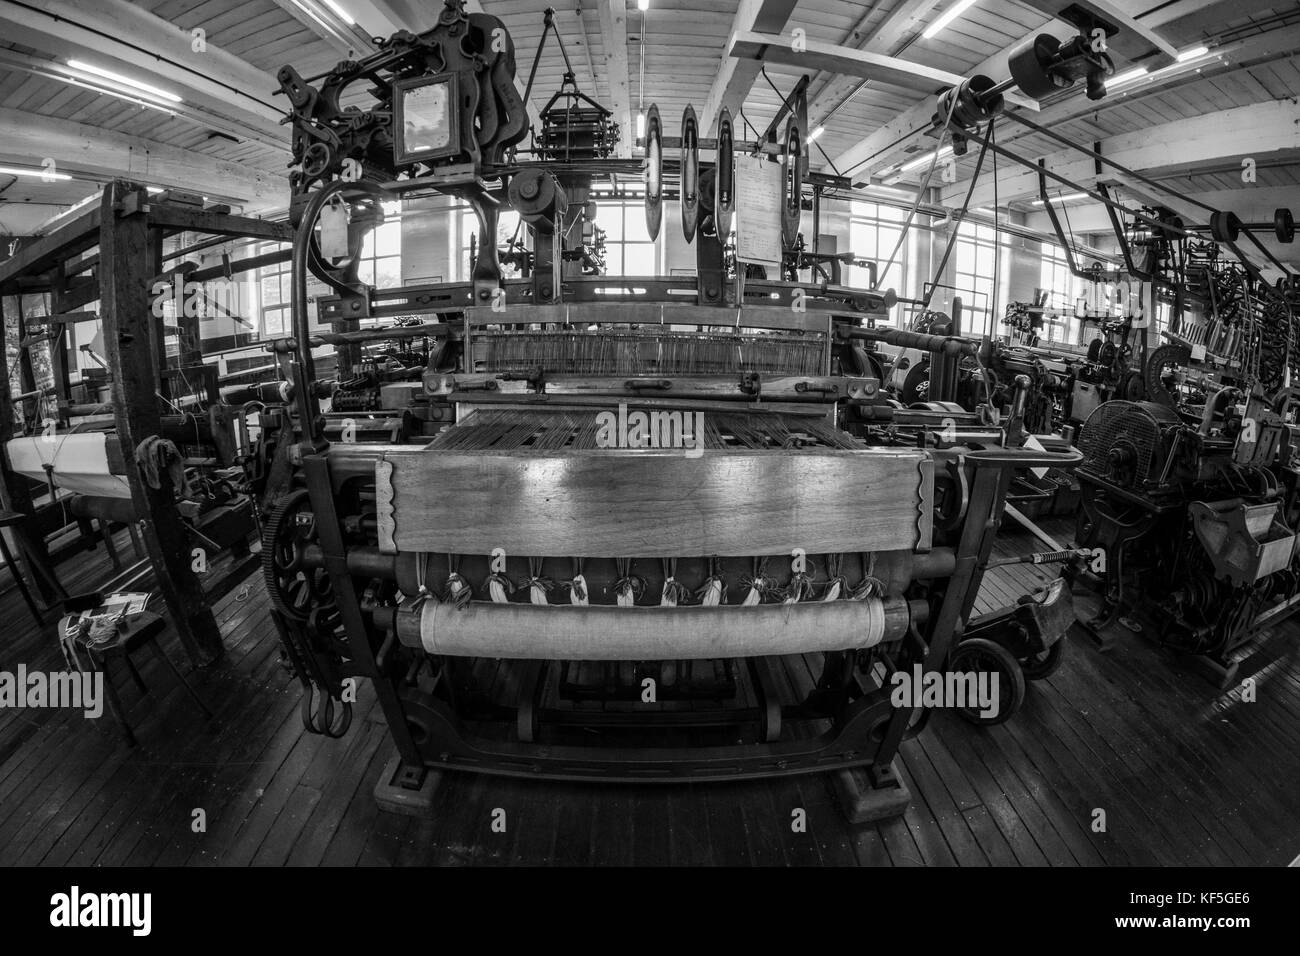 Textiles and Machinery on display at Bradford Industrial Museum, West Yorkshire, England, UK Stock Photo